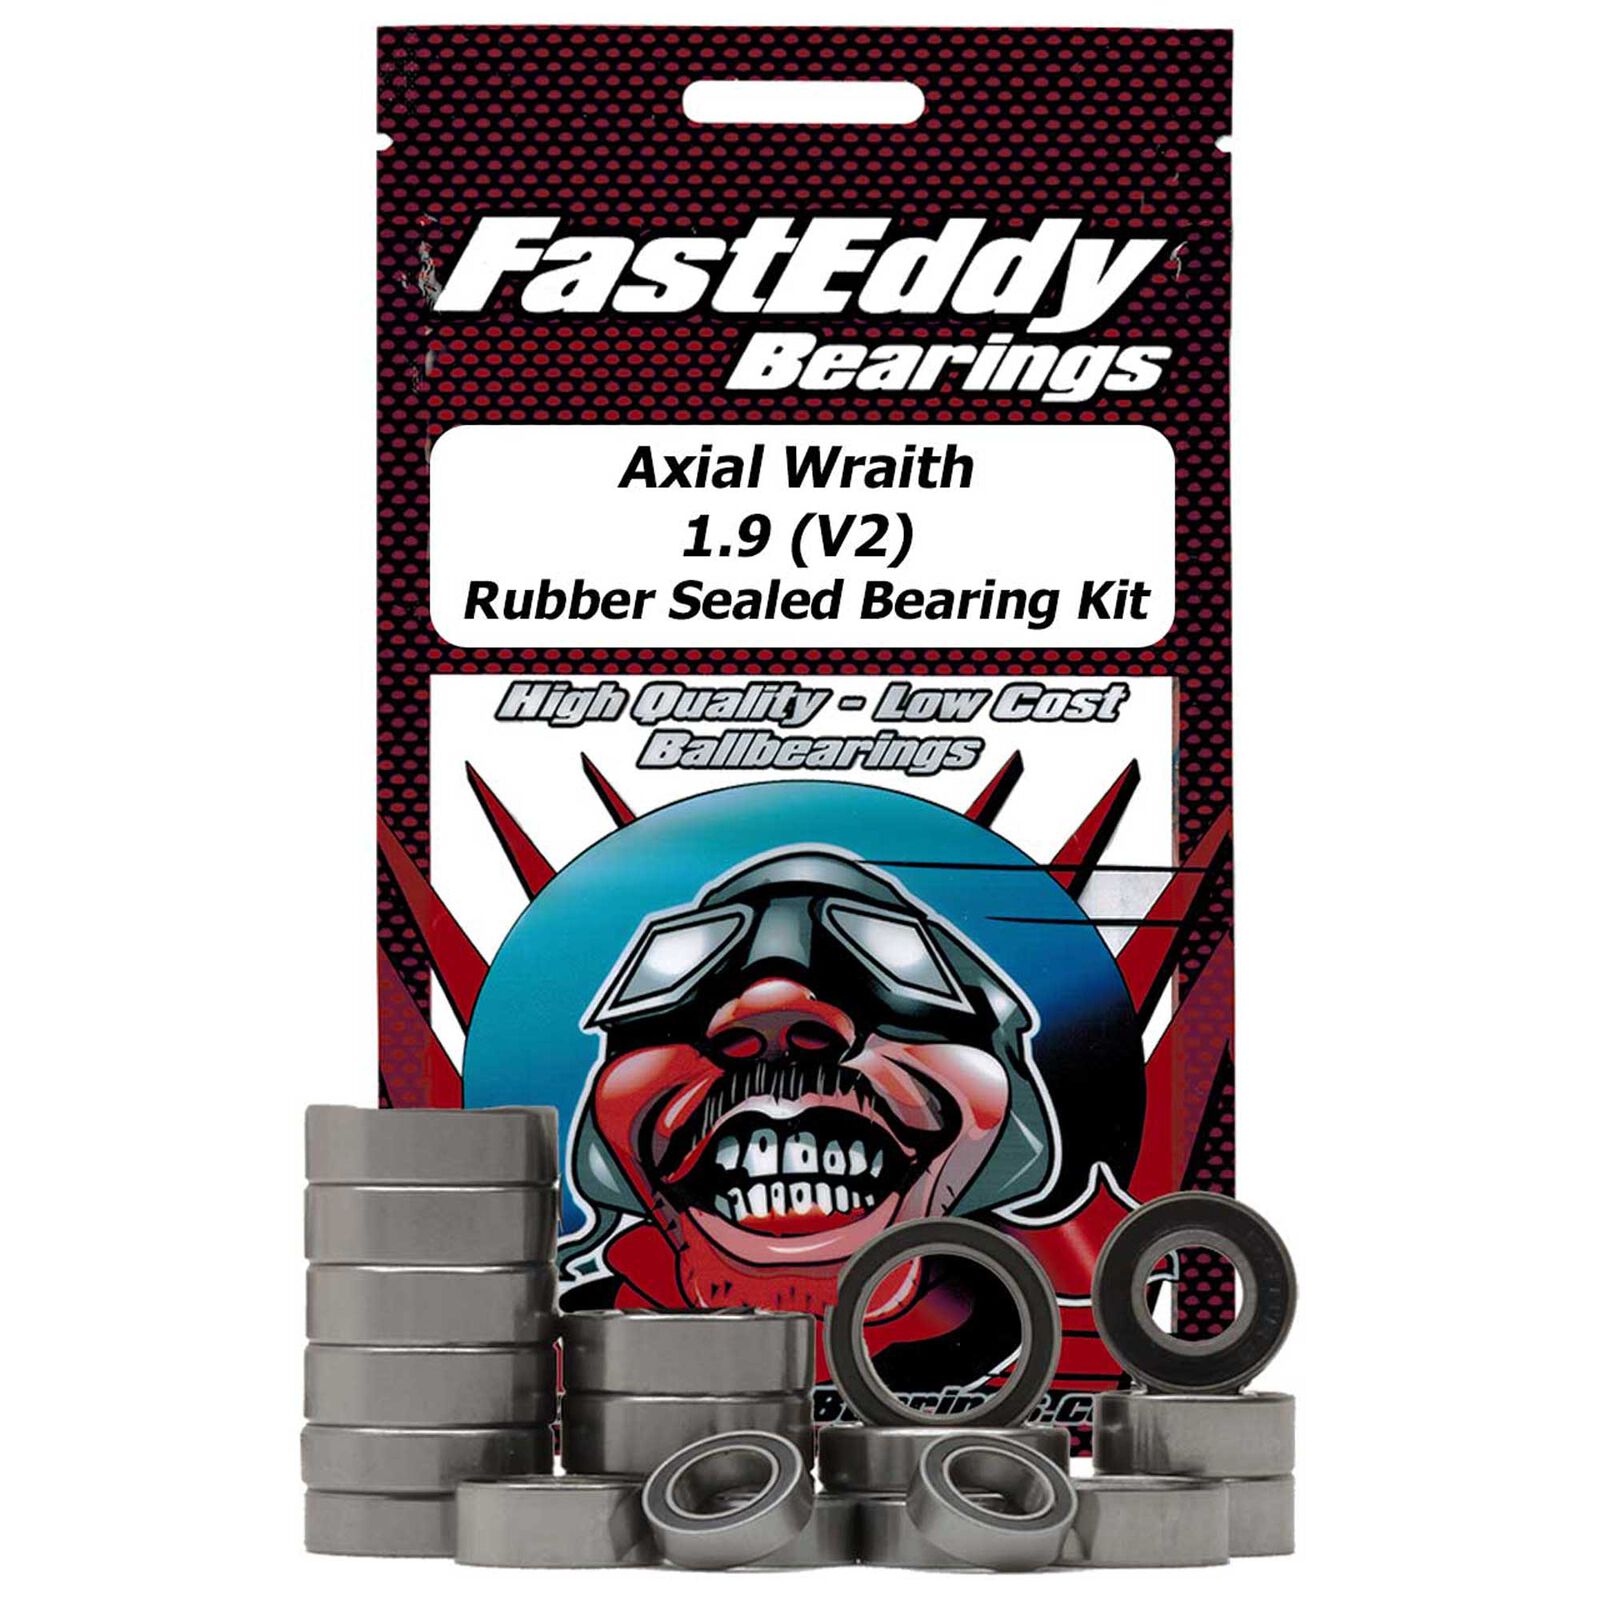 Sealed Bearing Kit: Axial Wraith 1.9 (V2) Rubber